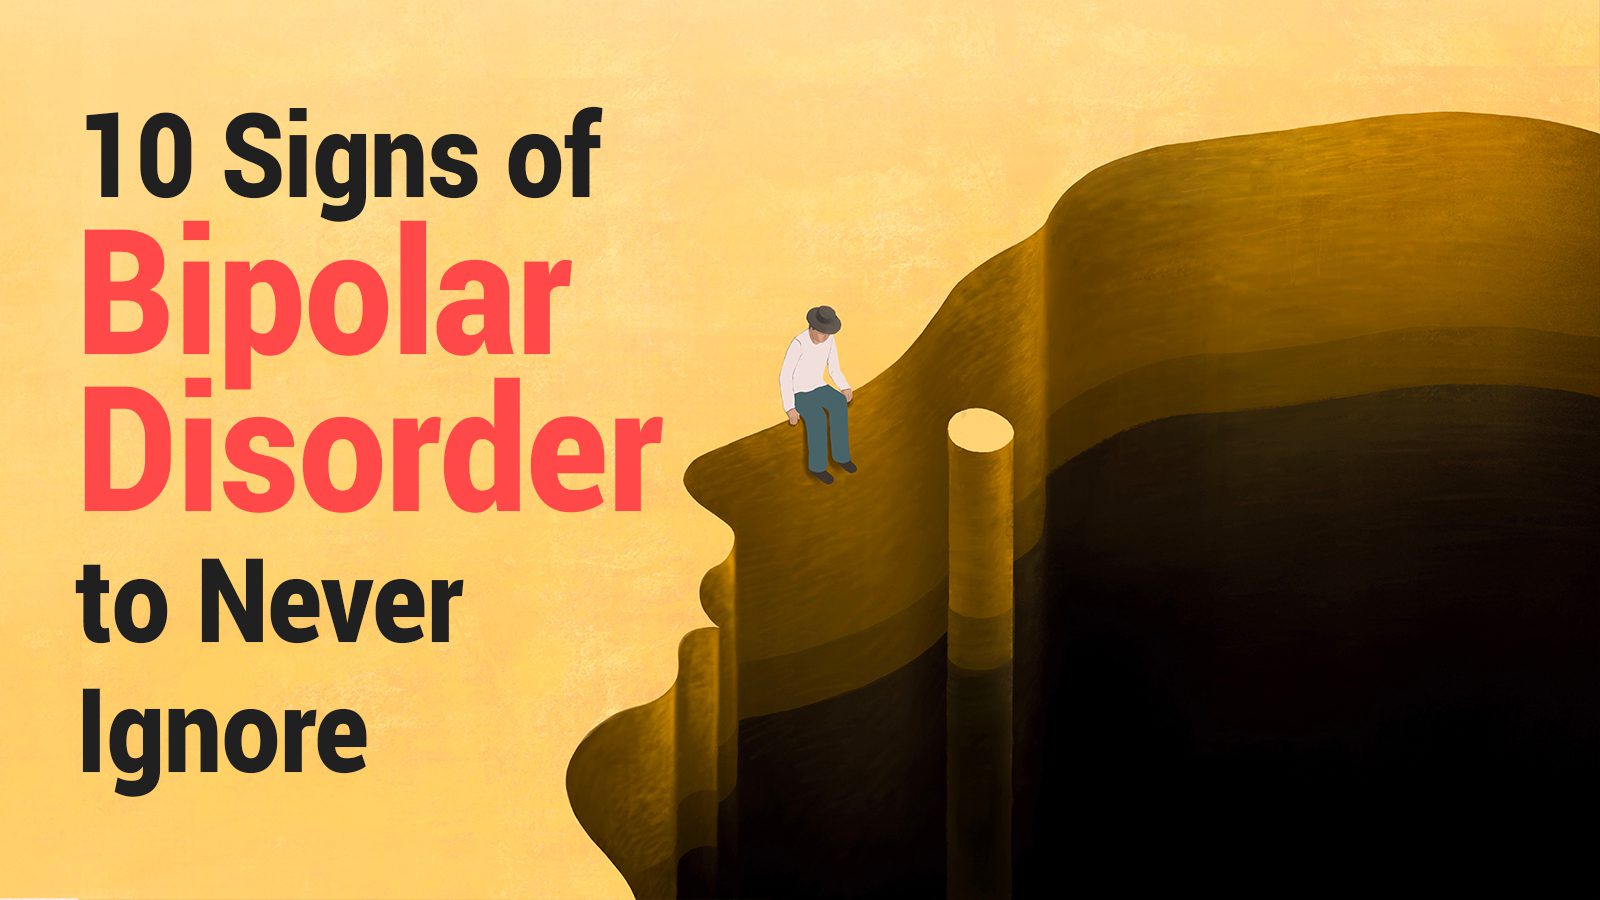 10 Signs of Bipolar Disorder to Never Ignore